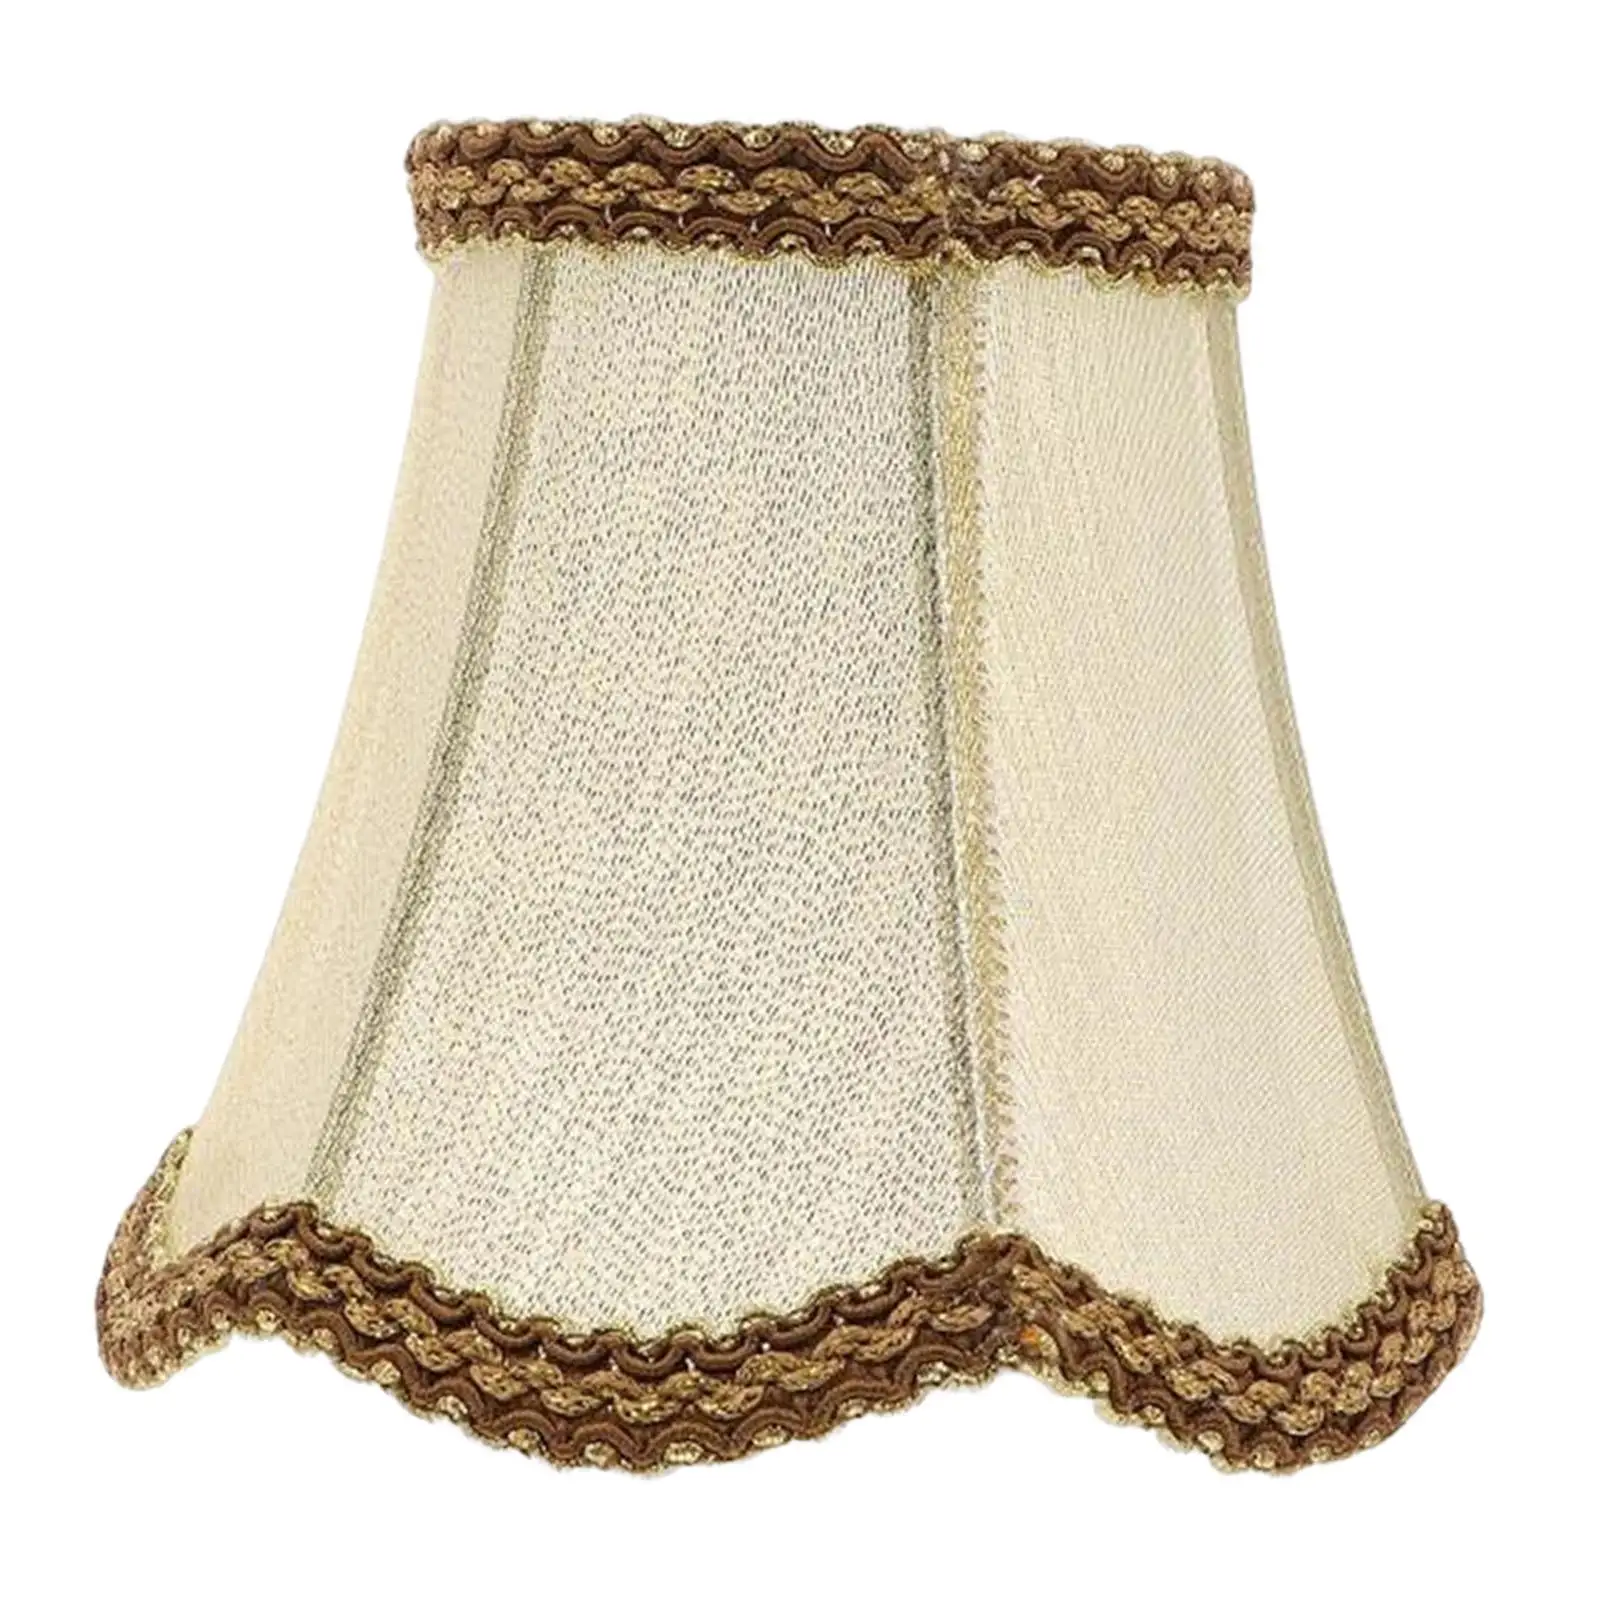 Retro Style Lampshade Ceiling Light Cover Lamp Shade for Dining Room Kitchen